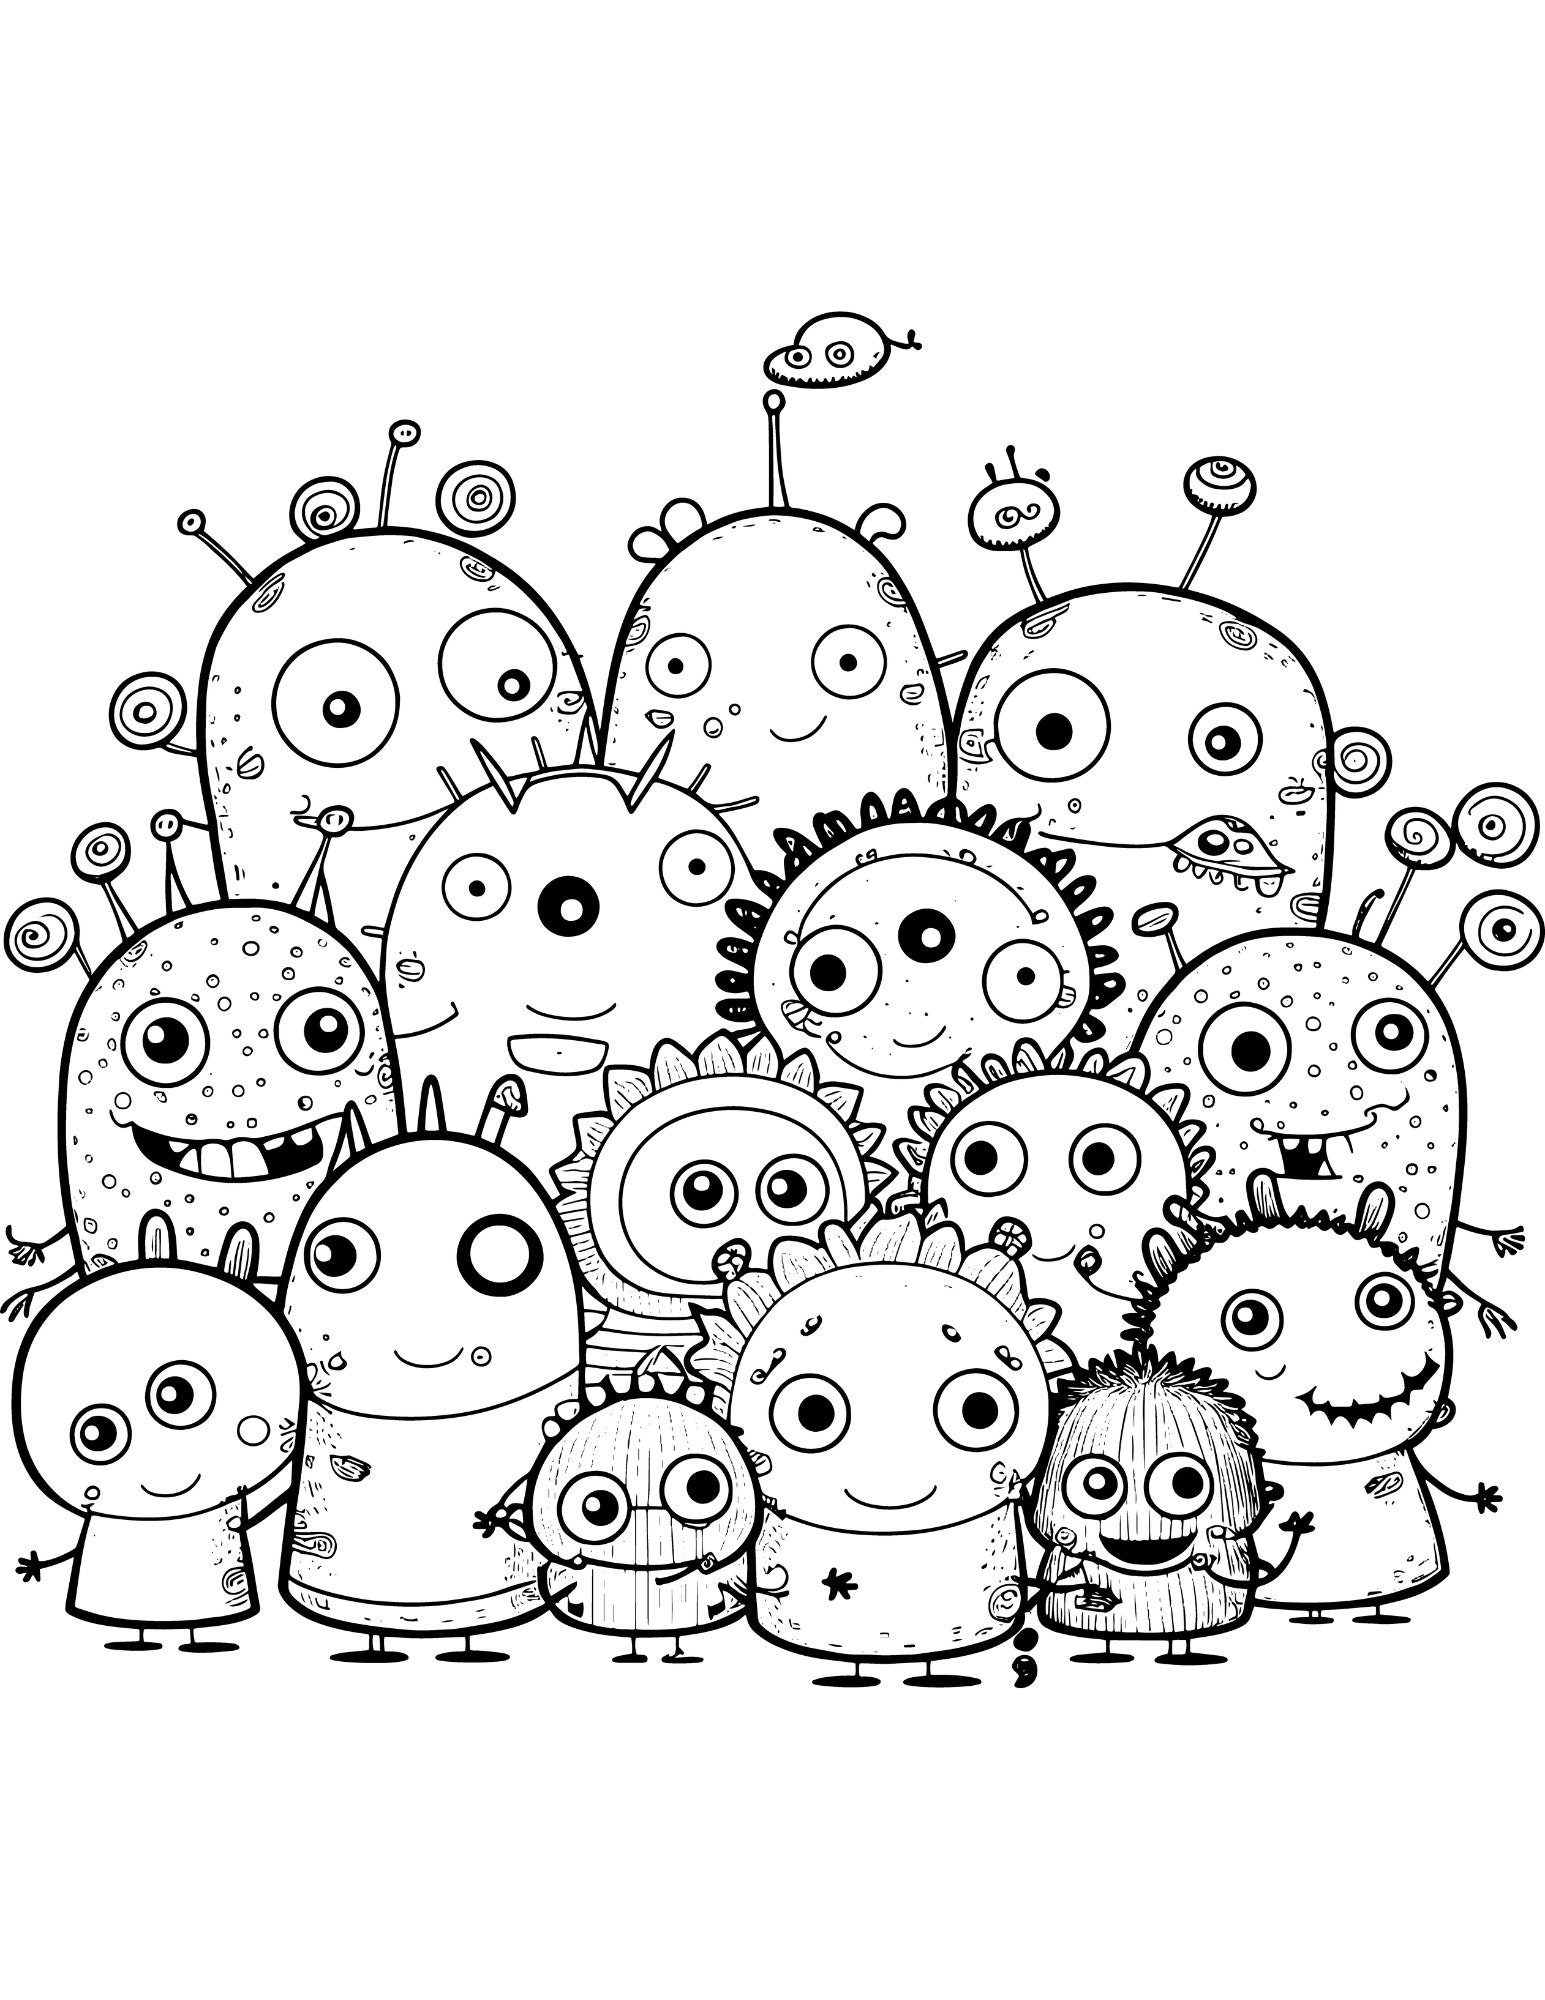 Pages of funny monsteralien coloring pages